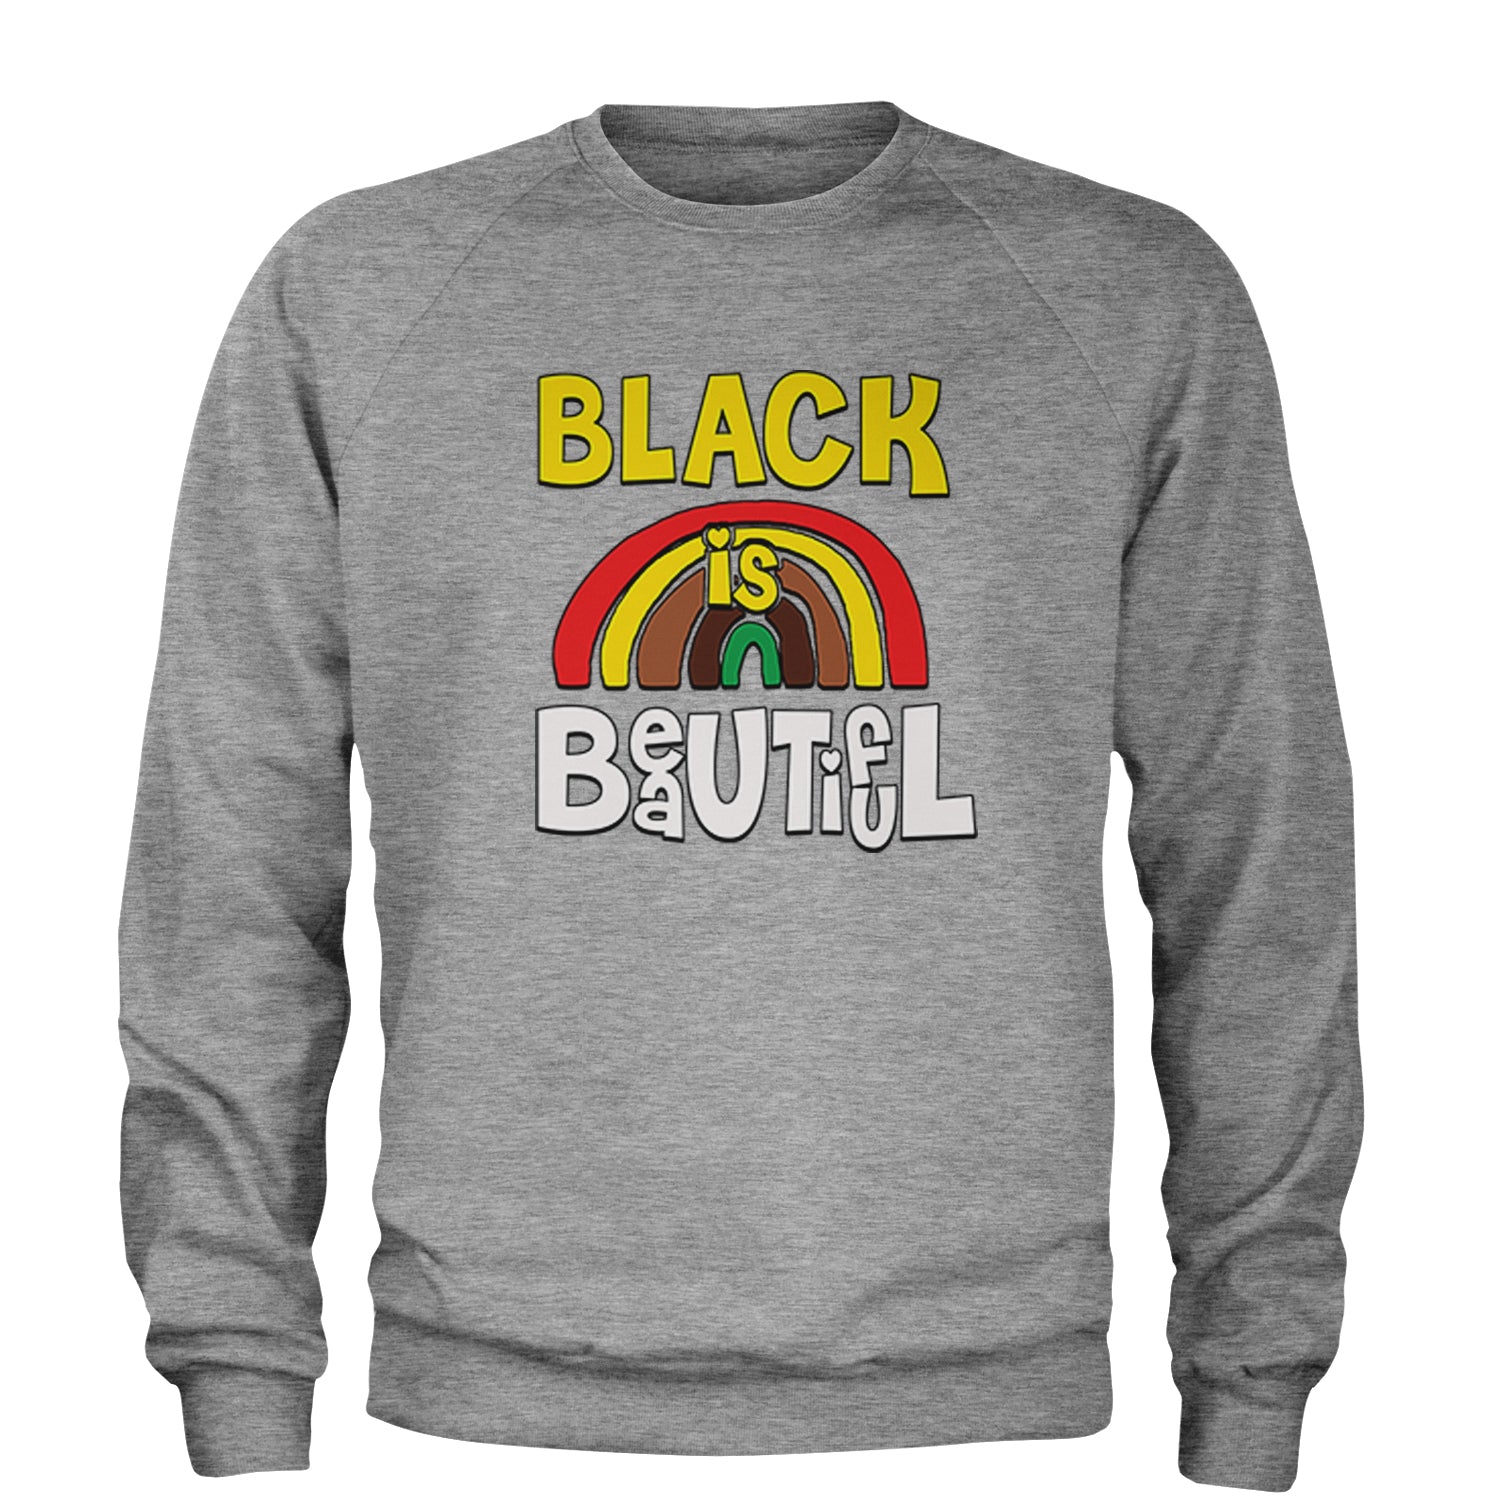 Black Is Beautiful Rainbow Adult Crewneck Sweatshirt african, africanamerican, american, black, blackpride, blm, harriet, king, lives, luther, malcolm, march, martin, matter, parks, protest, rosa, tubman, x by Expression Tees